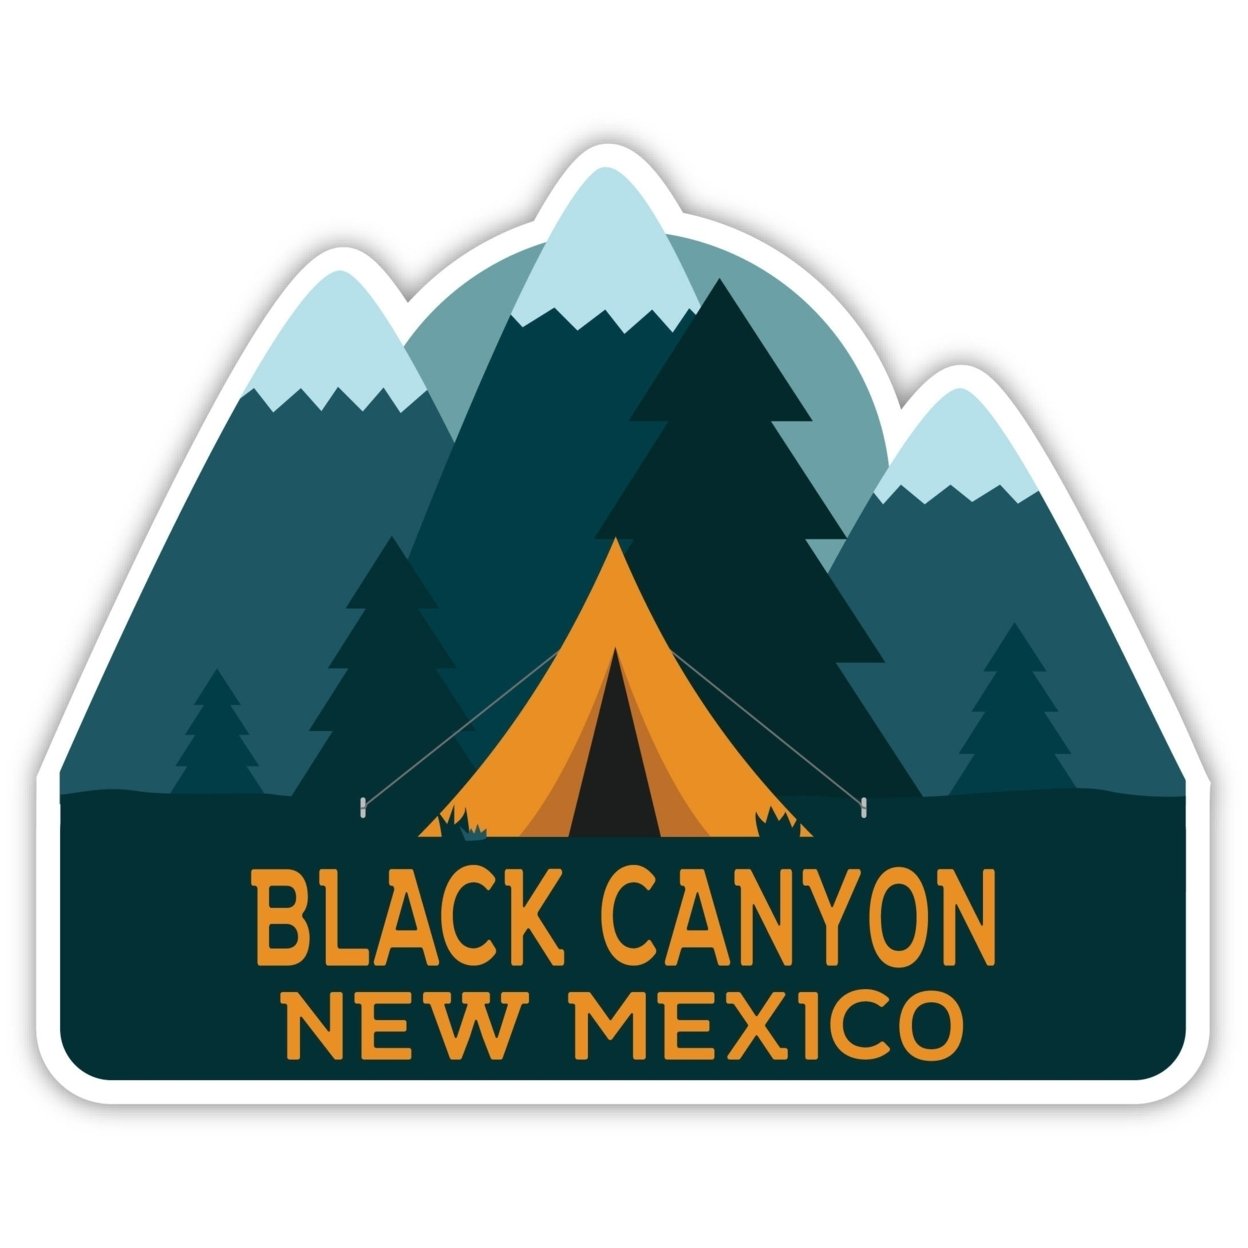 Black Canyon New Mexico Souvenir Decorative Stickers (Choose Theme And Size) - 4-Pack, 8-Inch, Tent